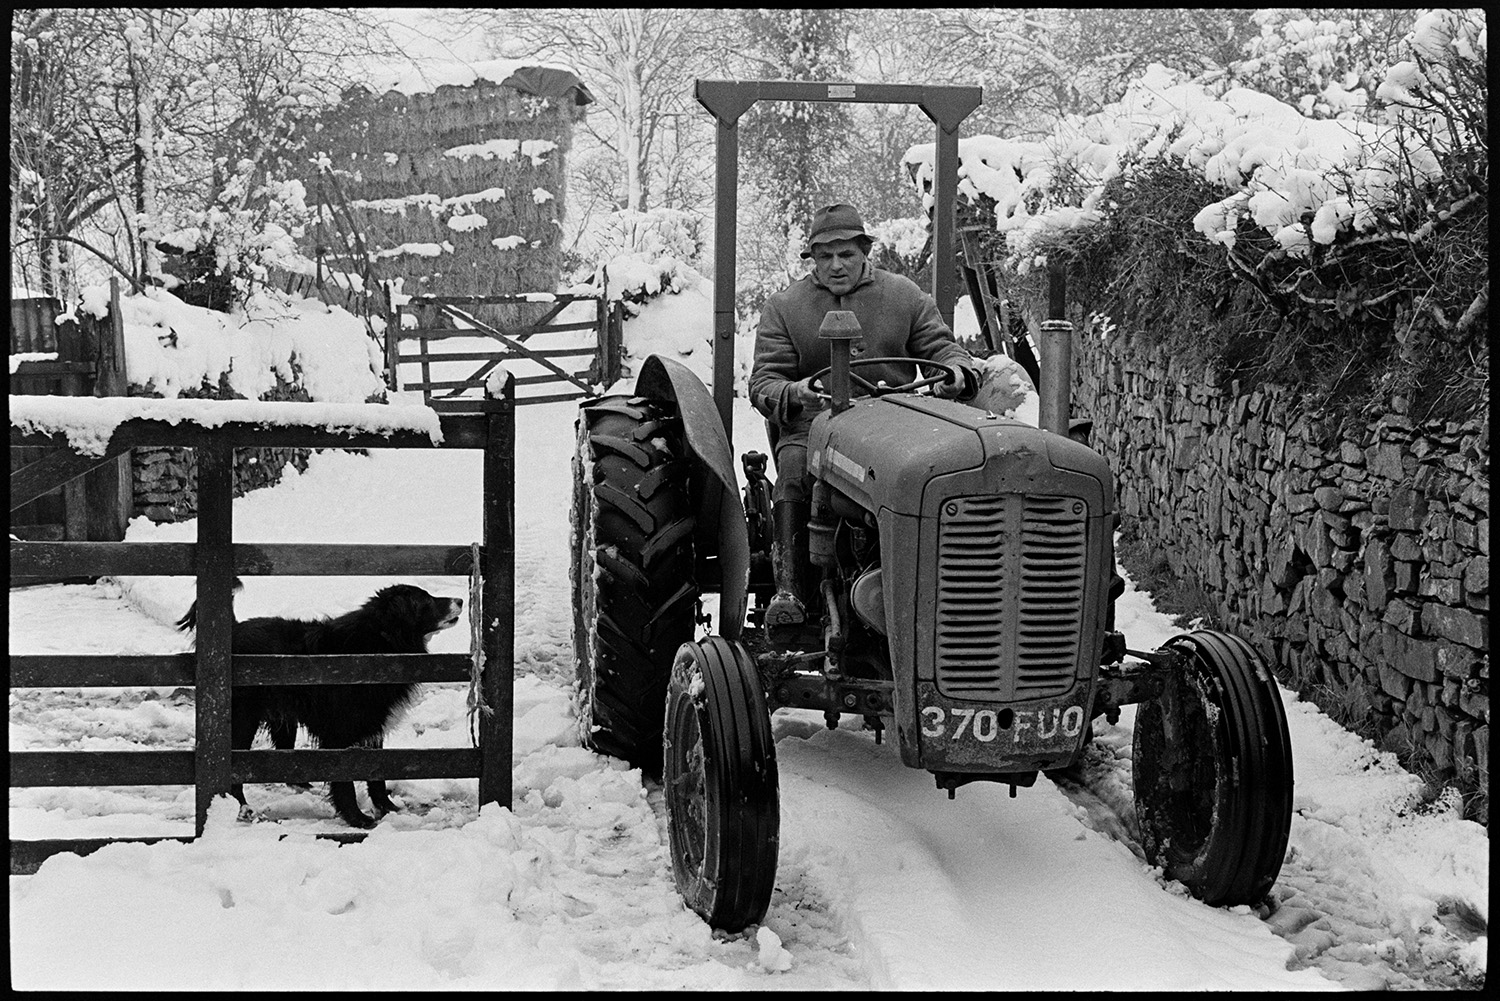 Snow, tractor in farm yard and farmer filling fuel tank with diesel. 
[Alf Pugsley driving a tractor through a snowy farmyard at Lower Langham, Dolton. A dog is watching him behind a gate and a stack of hay bales covered in snow are visible in the background.]